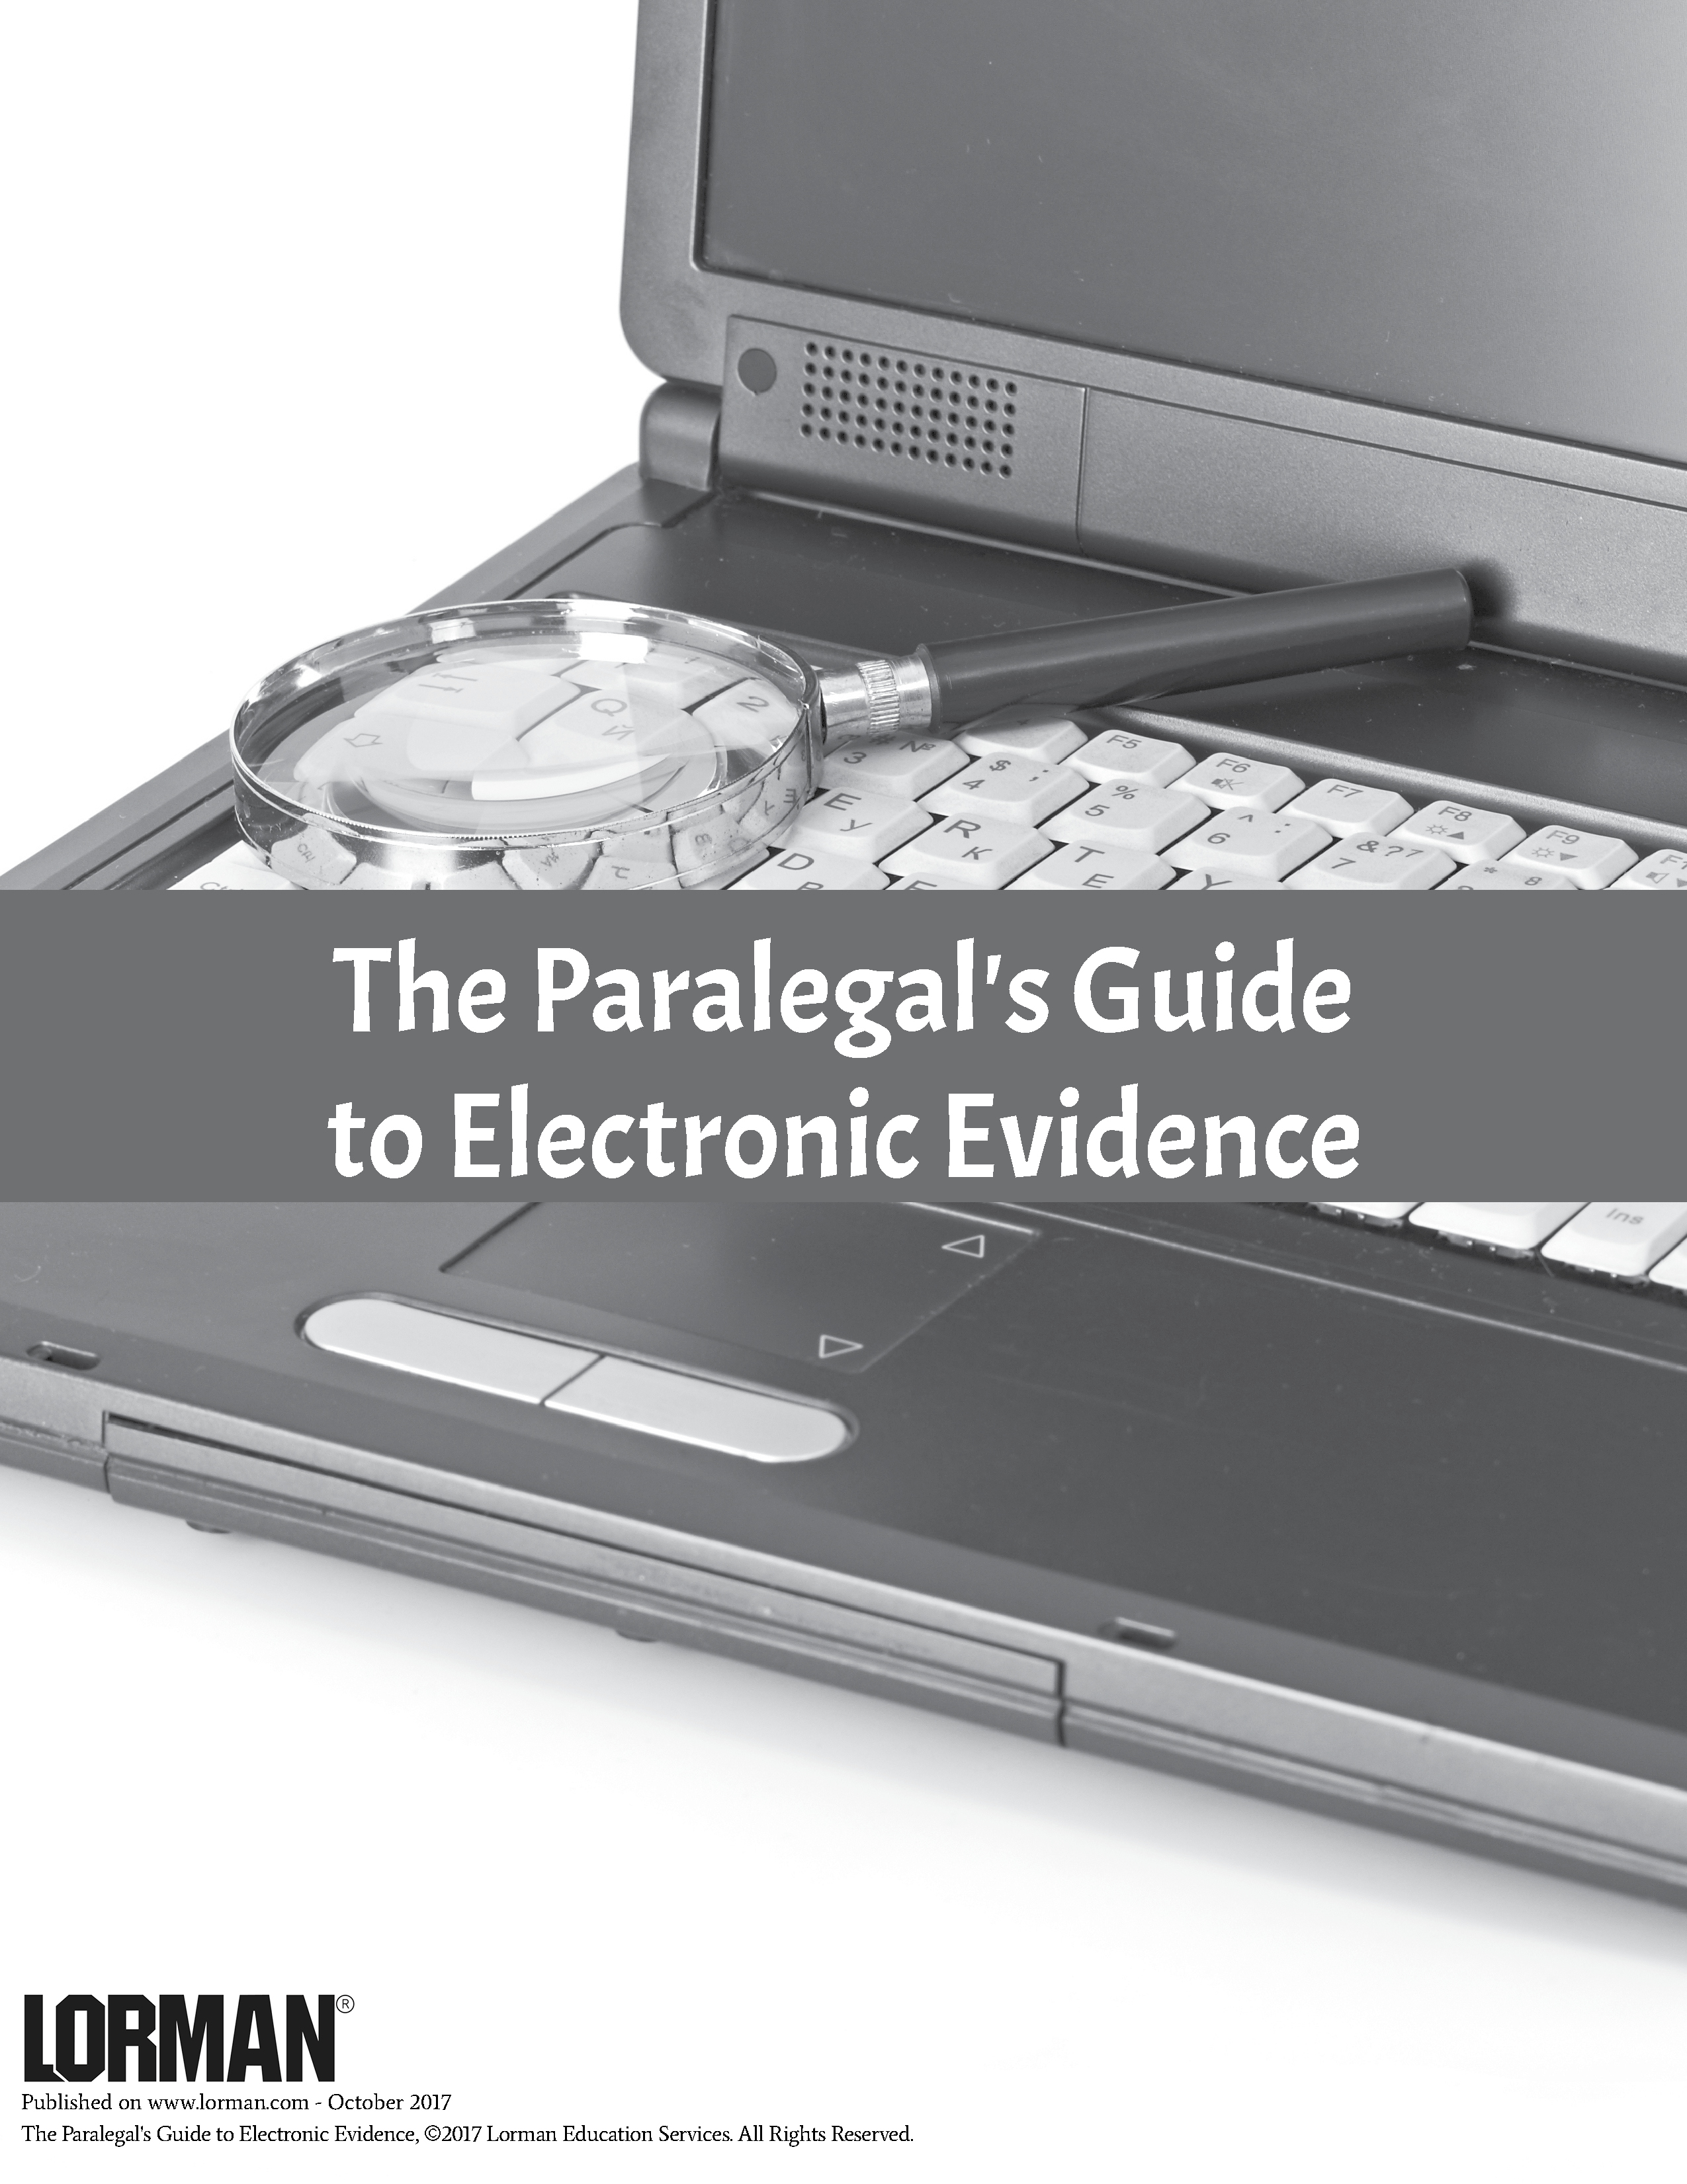 The Paralegal's Guide to Electronic Evidence